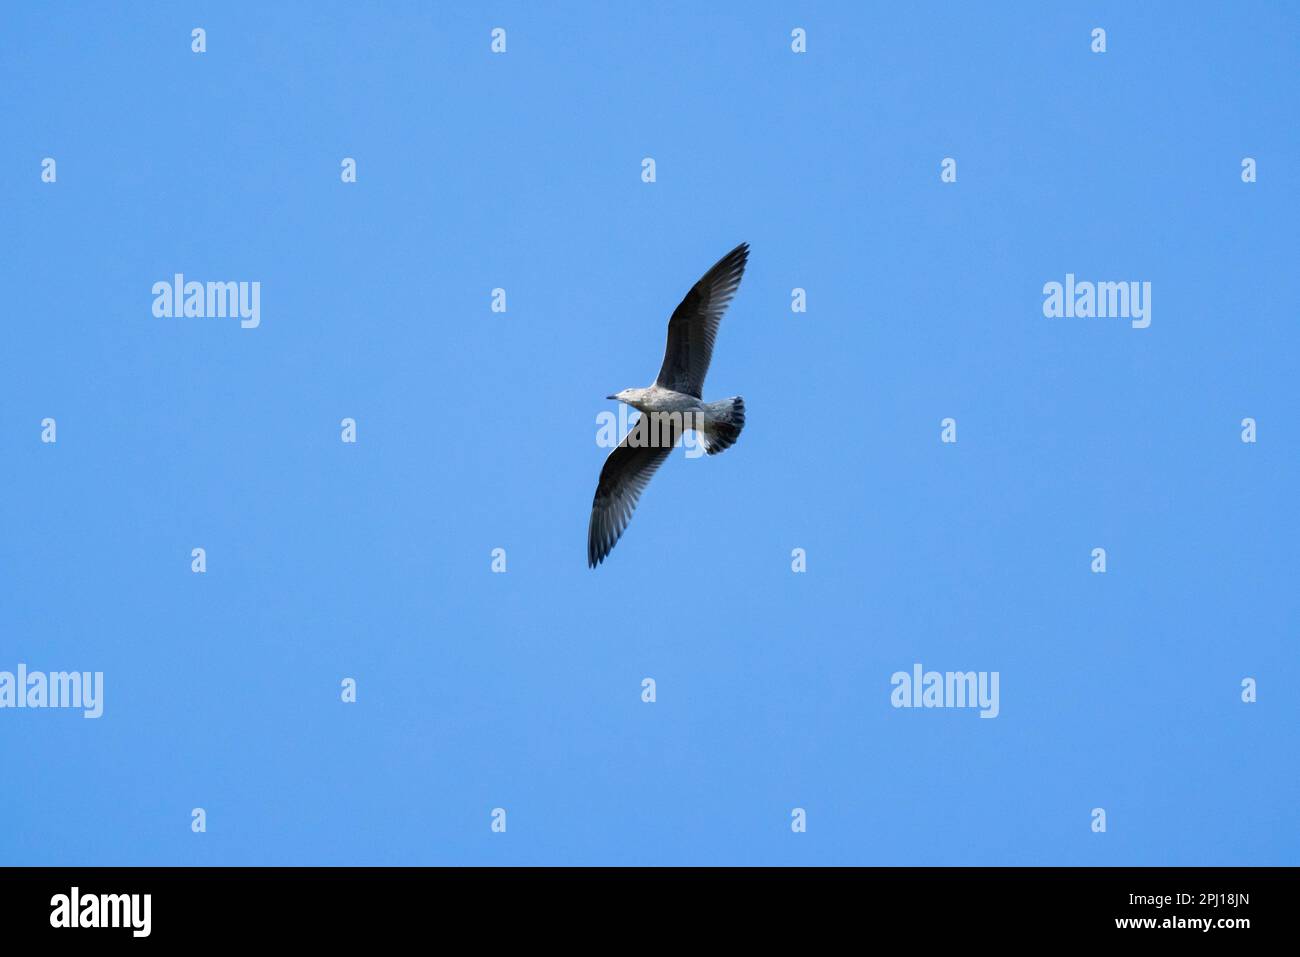 A seagull flies in clear blue sky, natural photo background Stock Photo